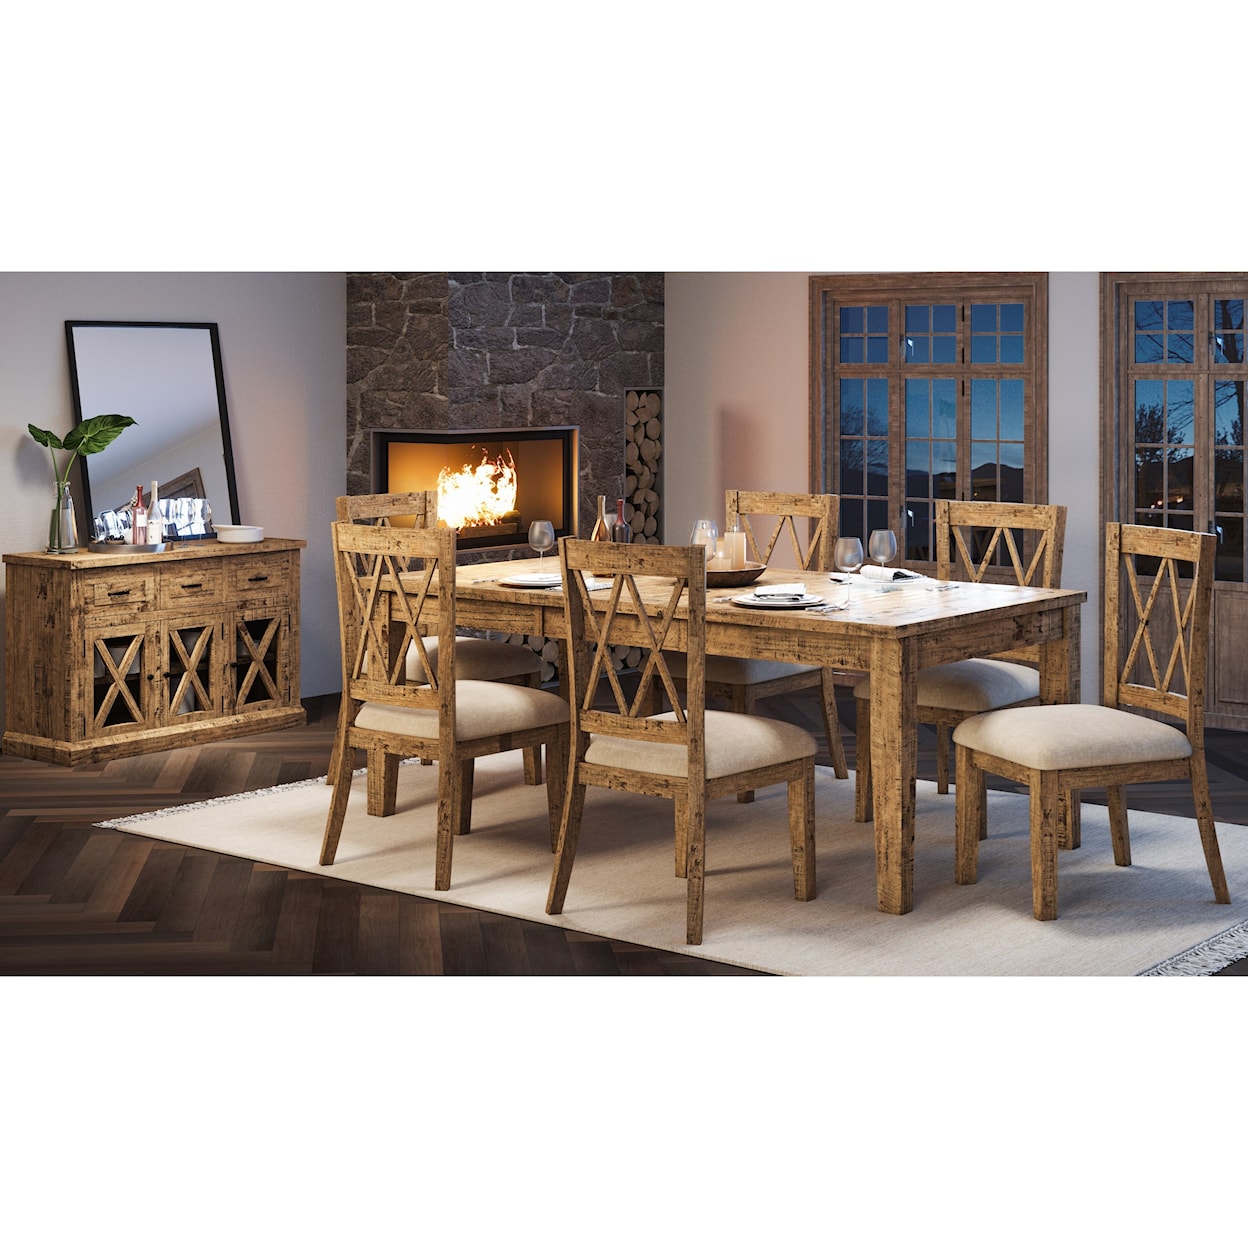 VFM Signature Telluride 7-Piece Table and Chair Set